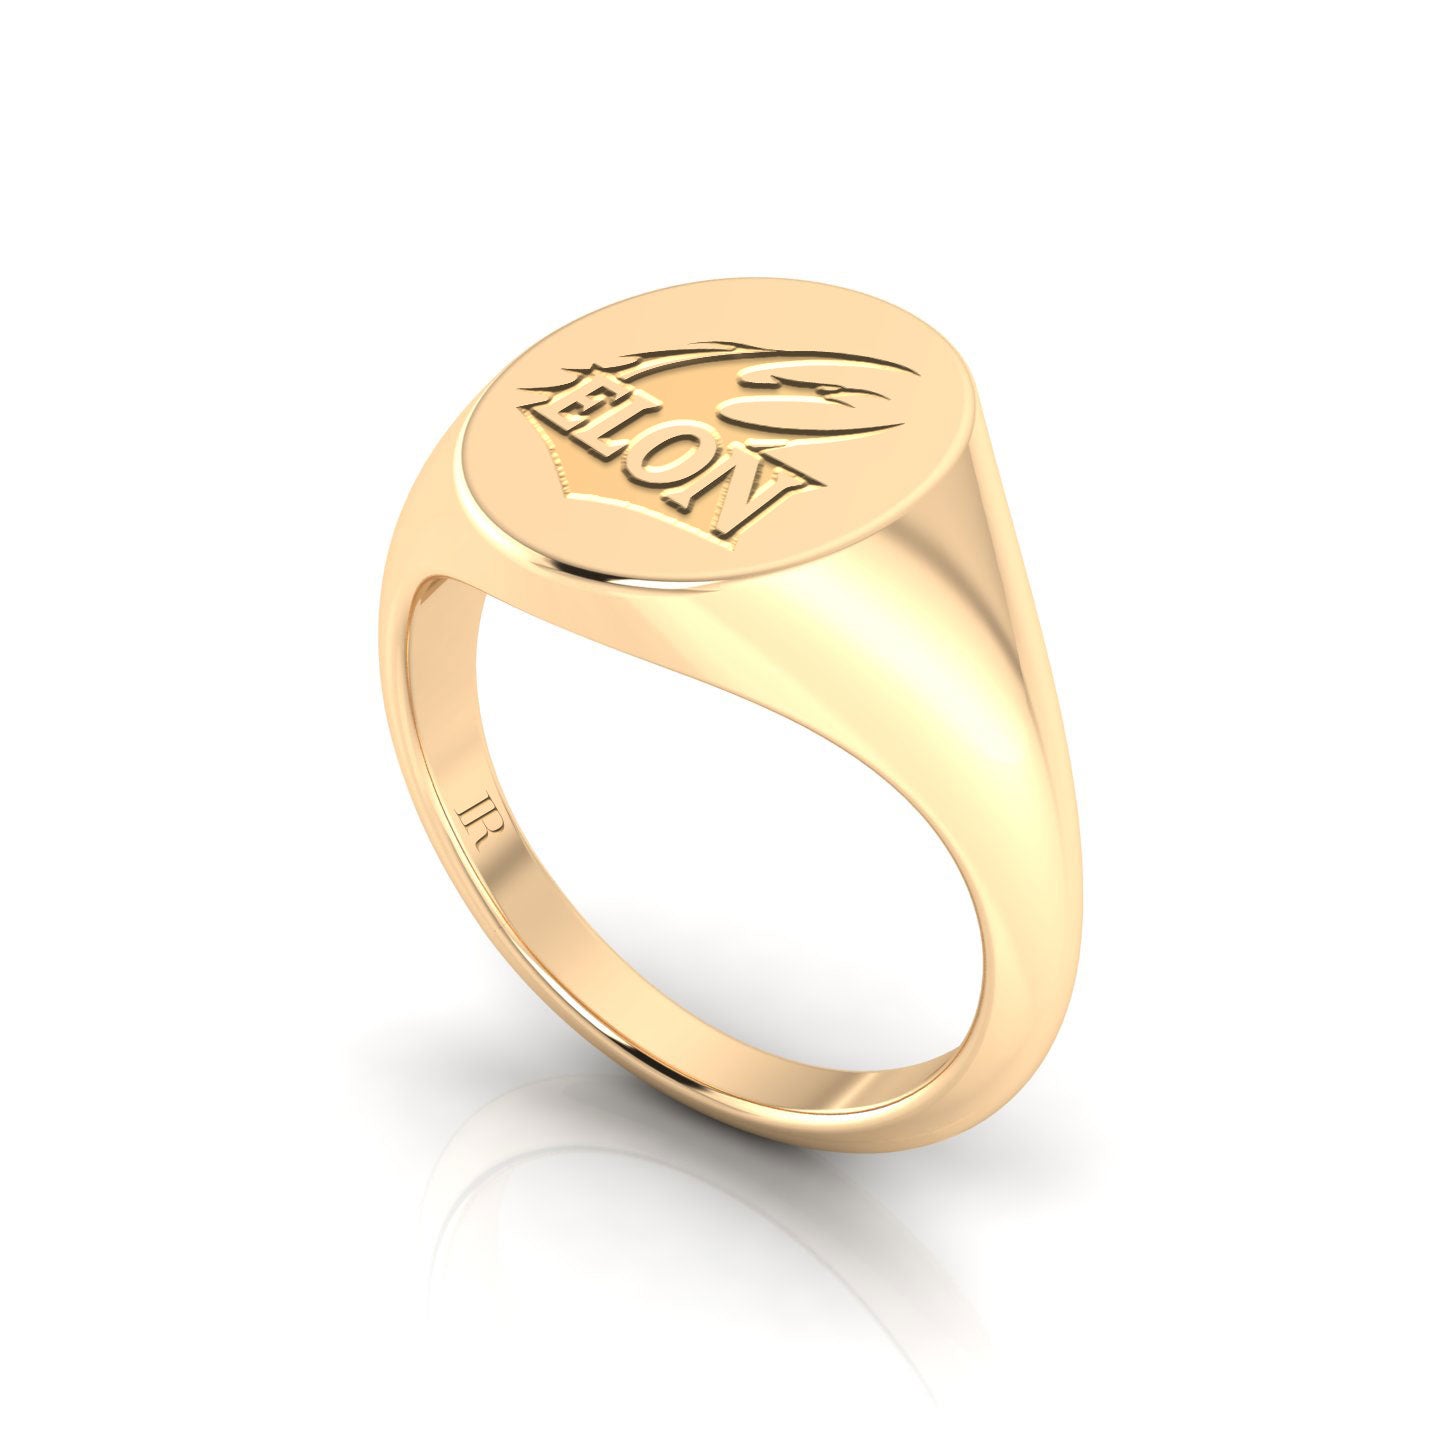 A side view of an Elon University Oval Heritage Class Ring in 14kt yellow gold. The ring is oval-shaped and has a comfortable fit.